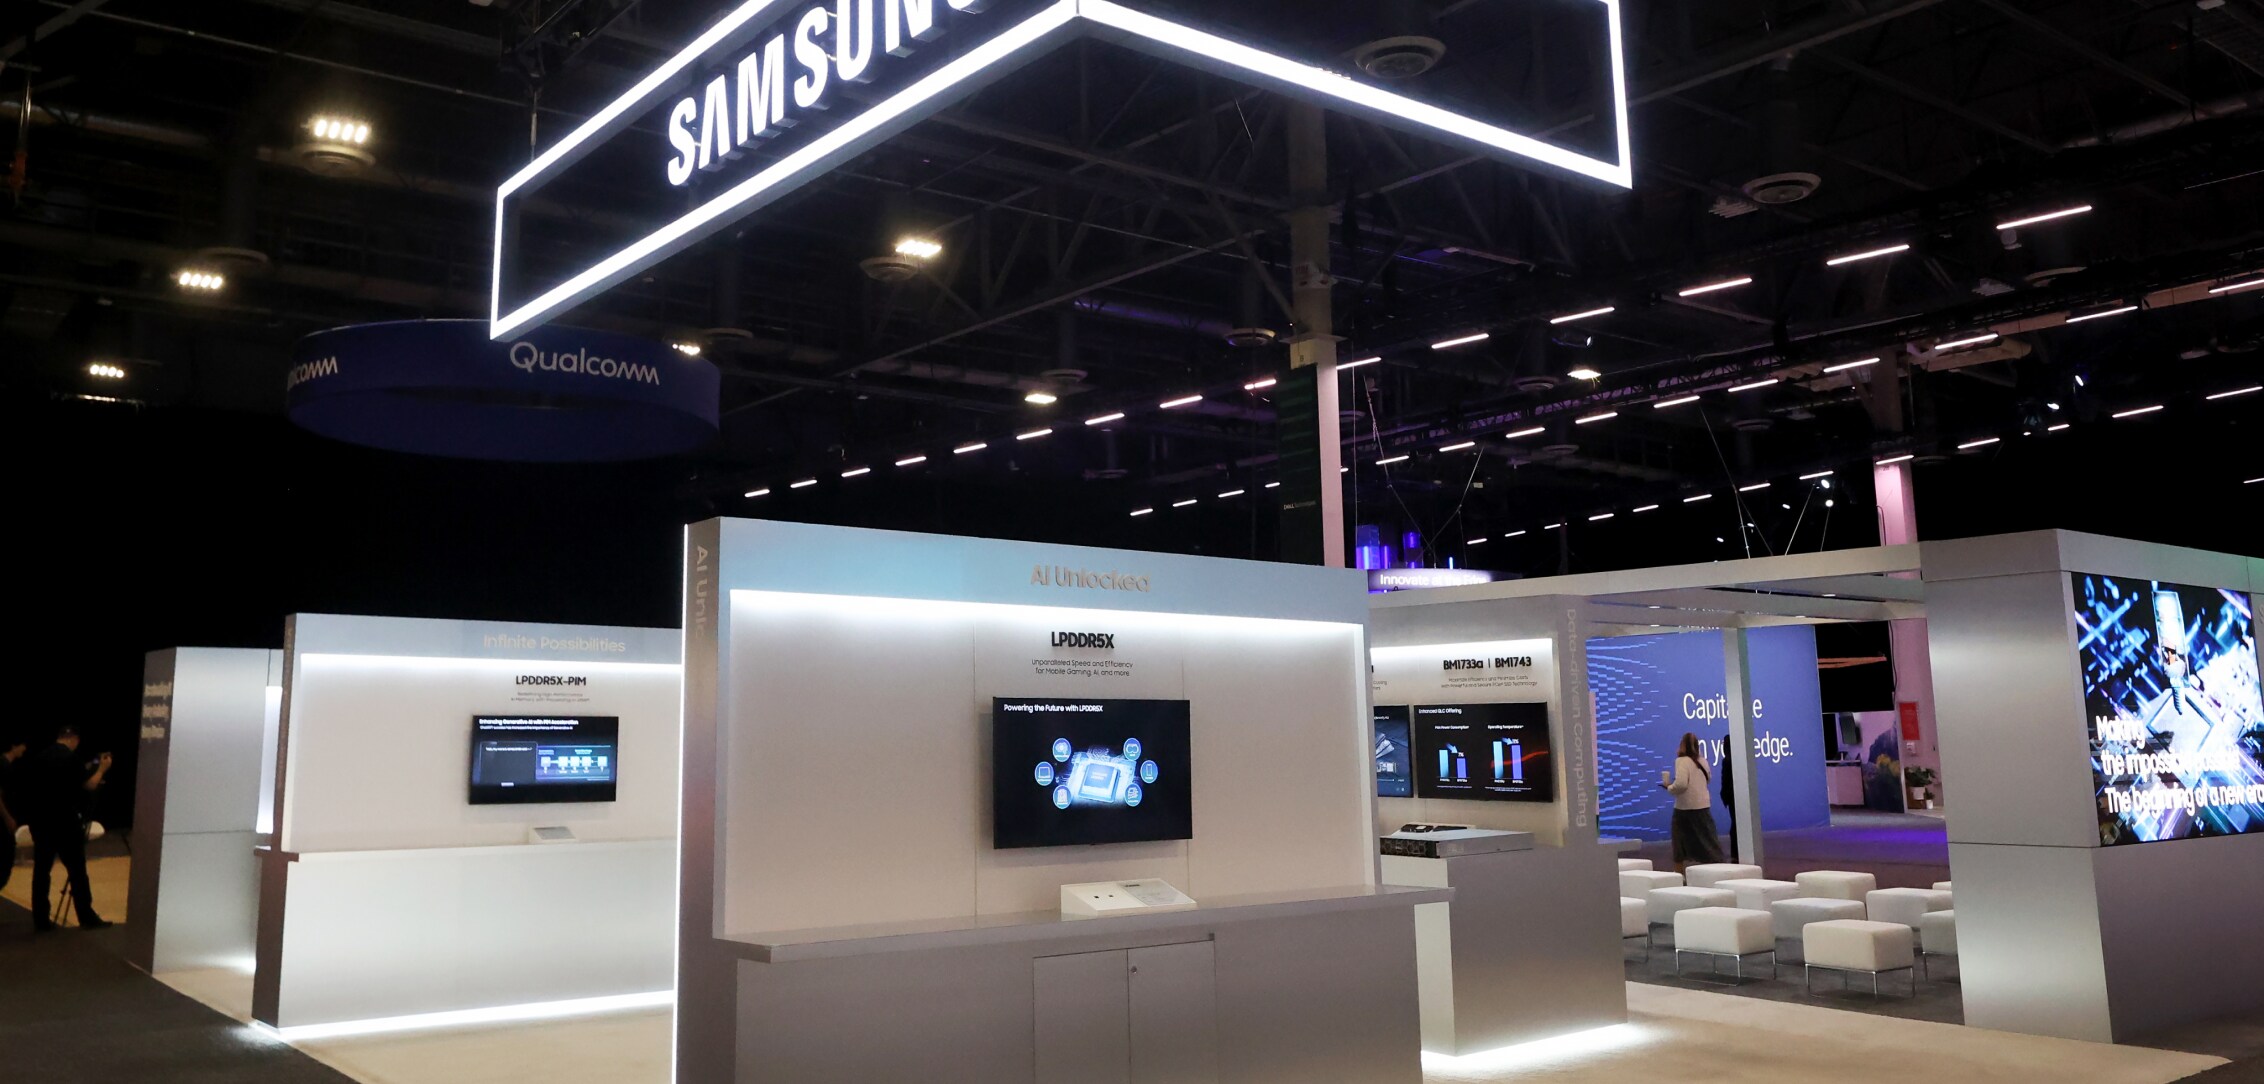 Samsung Semiconductor booth at Dell Technologies World 2024, featuring illuminated signage and multiple display screens showcasing their technology.